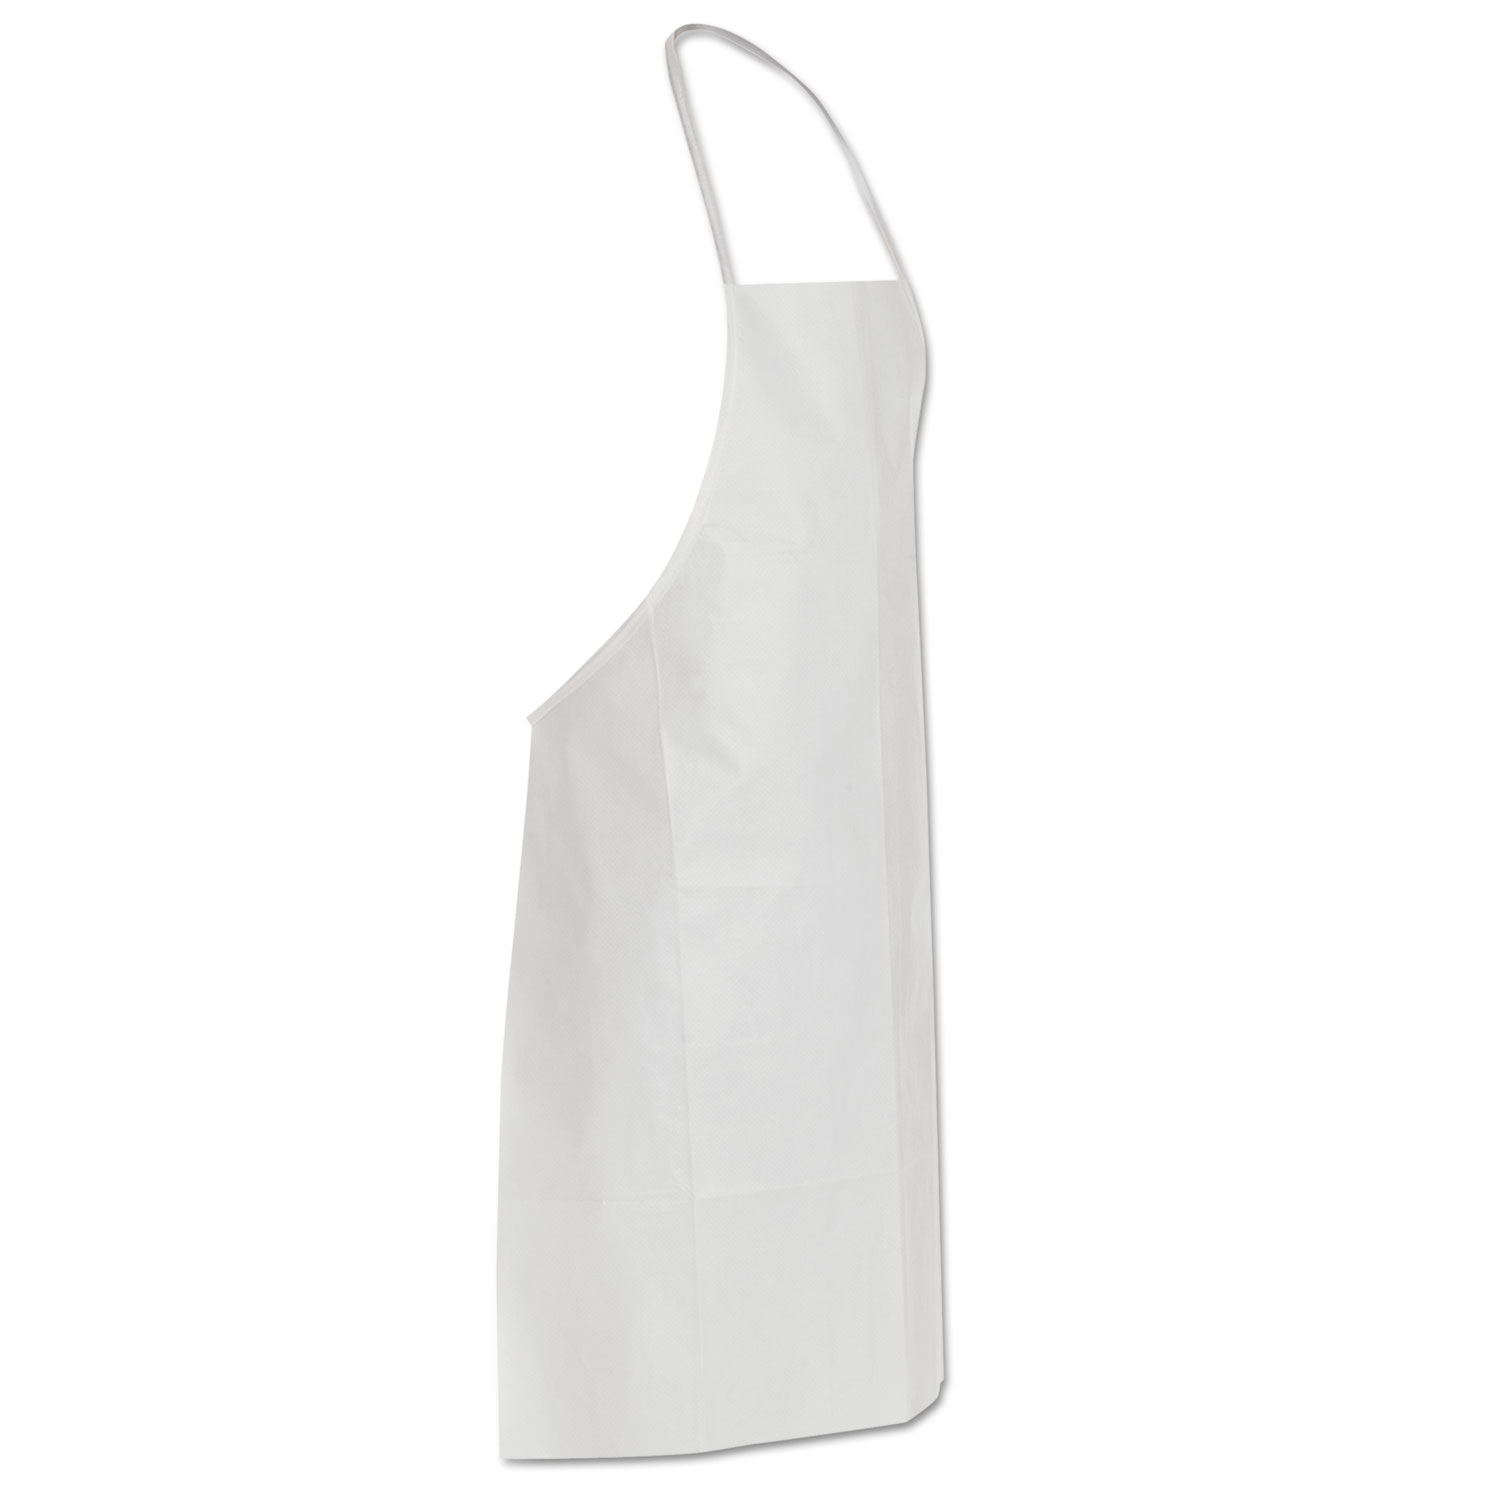  DuPont TY273BWH00010000 Tyvek Apron, White, One Size Fits All, 100/Carton (DUPTY273BWH) 